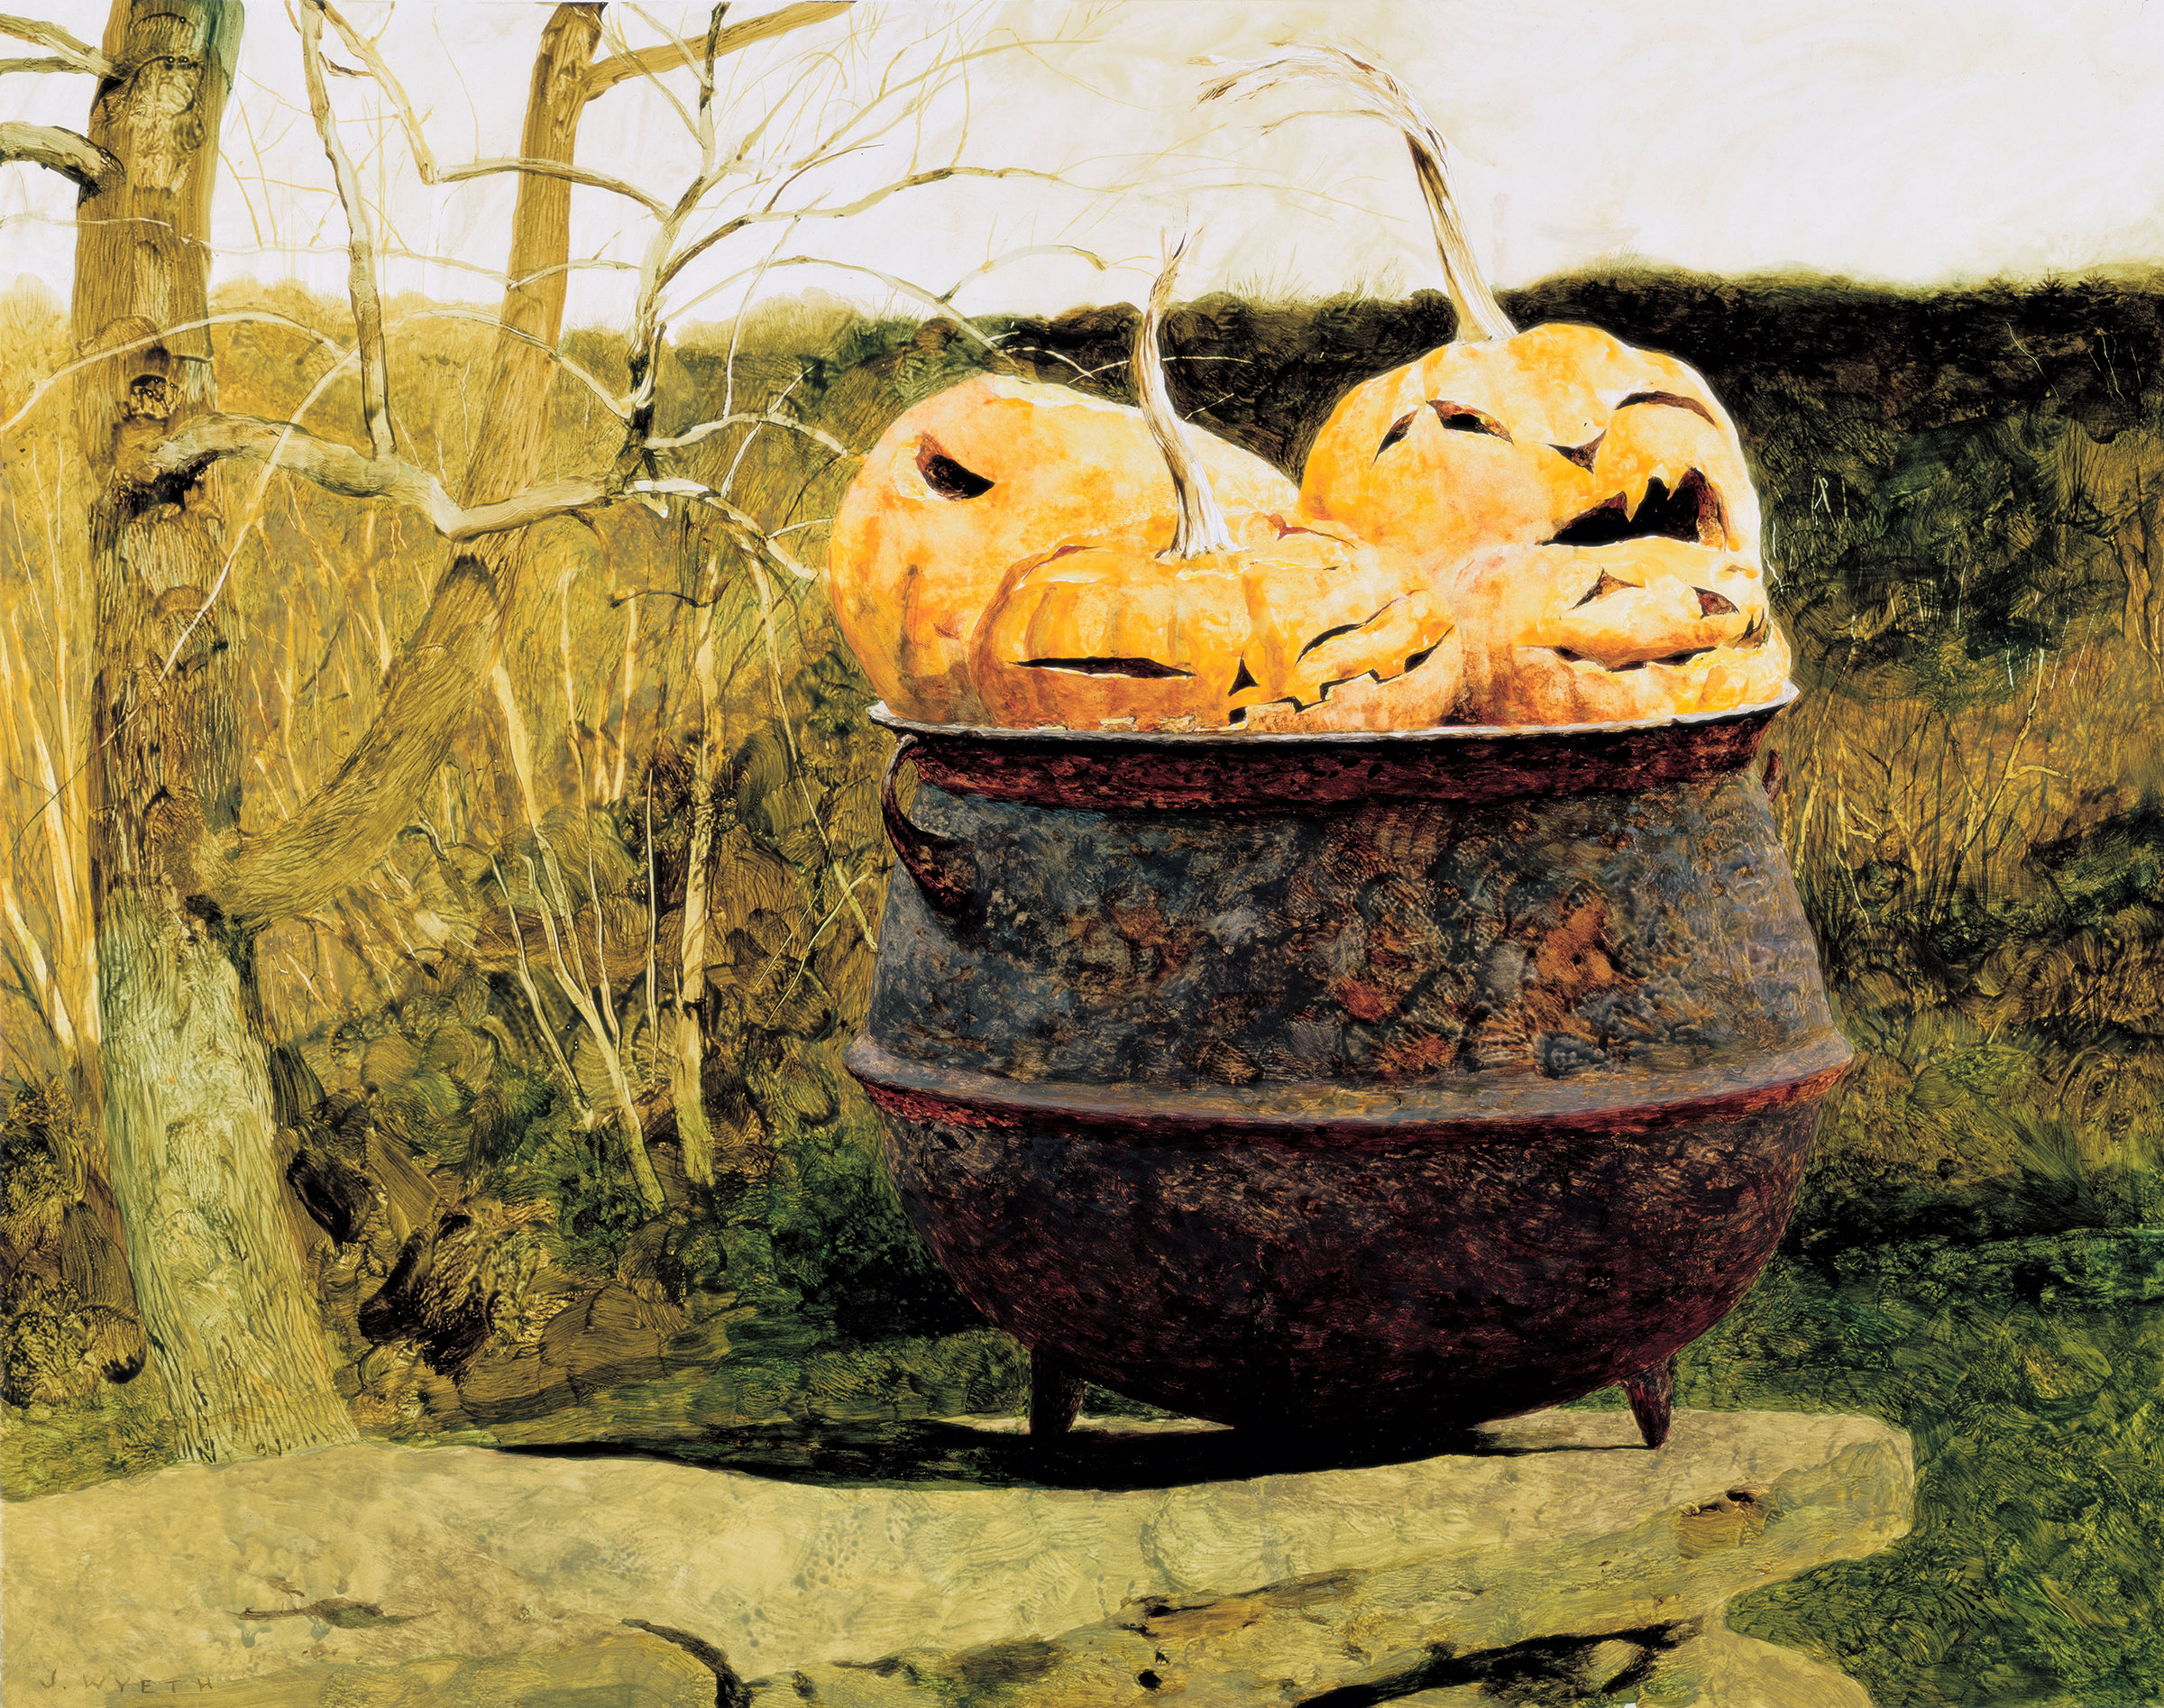 Jamie Wyeth (b. 1946), After Halloween, 1982, mixed media on paper. © Jamie Wyeth / Artists Rights Society (ARS), New York